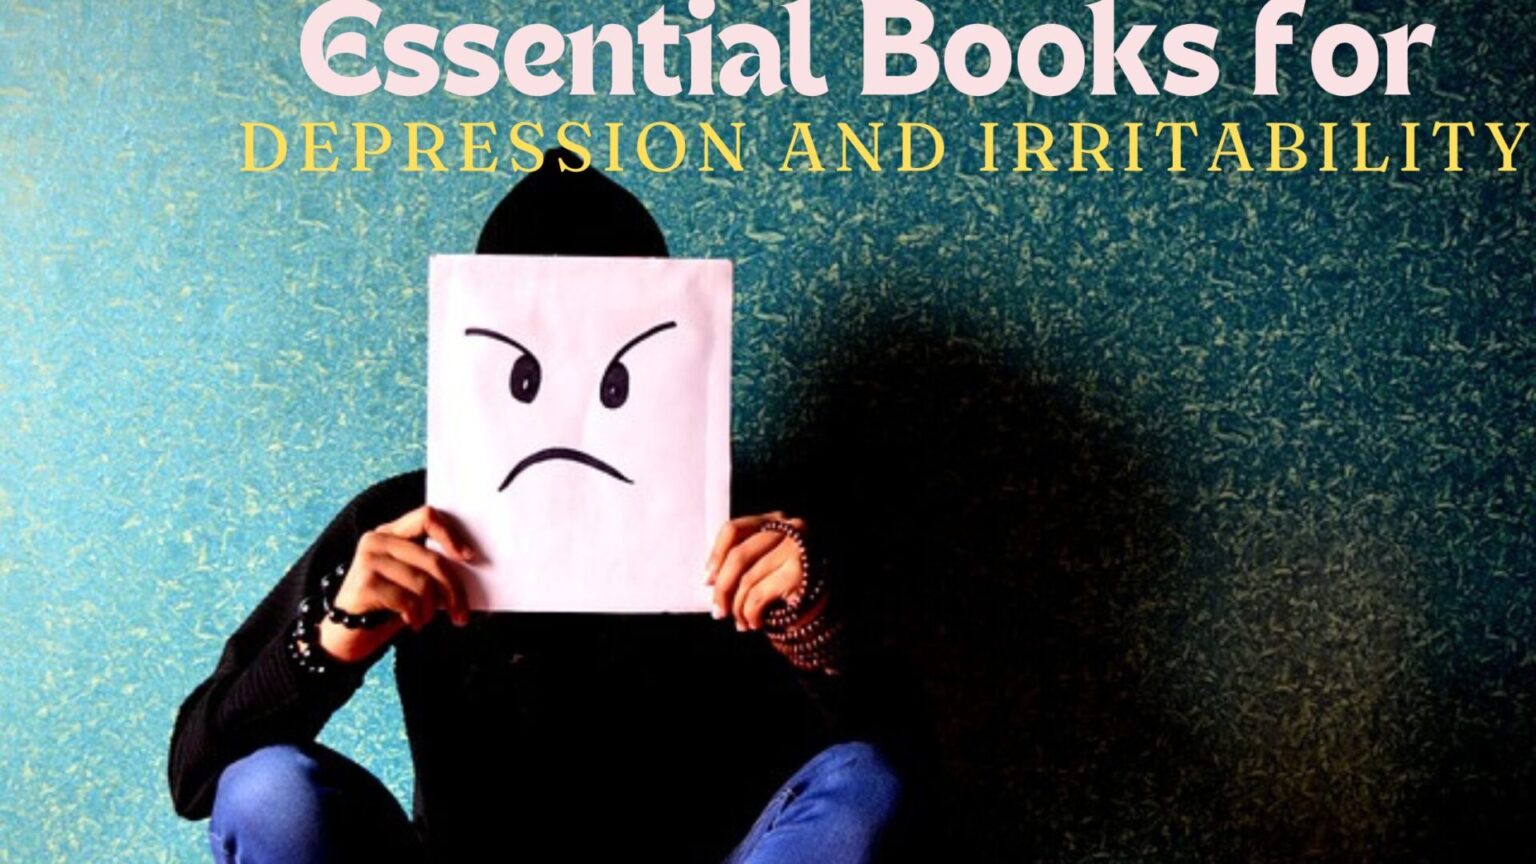 Essential Books for Depression and Irritability